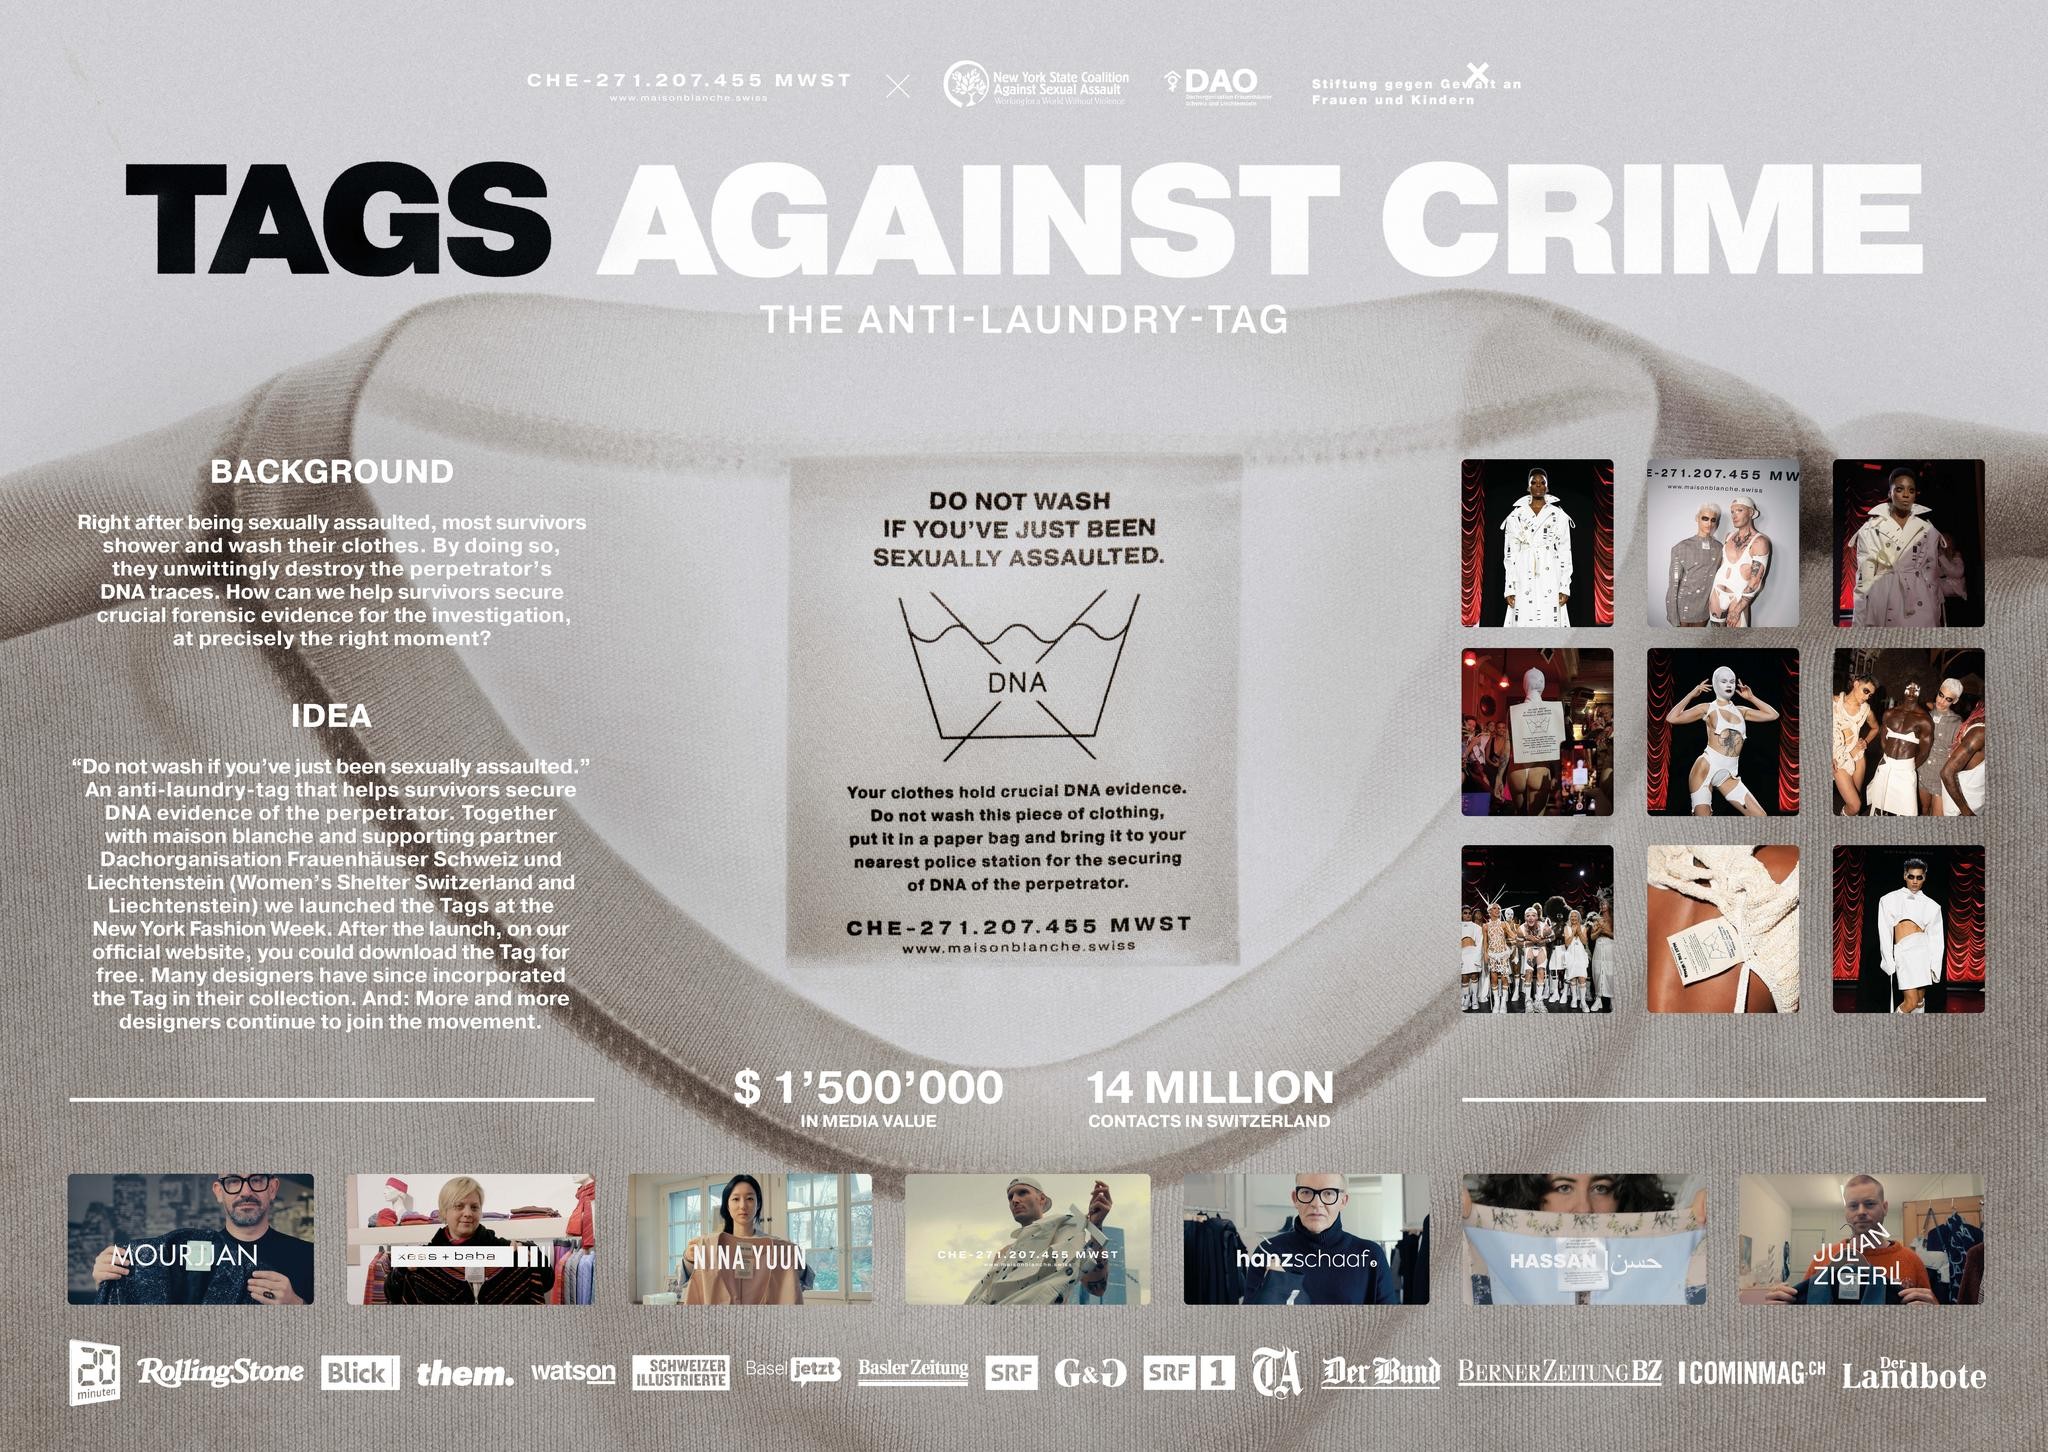 TAGS AGAINST CRIME